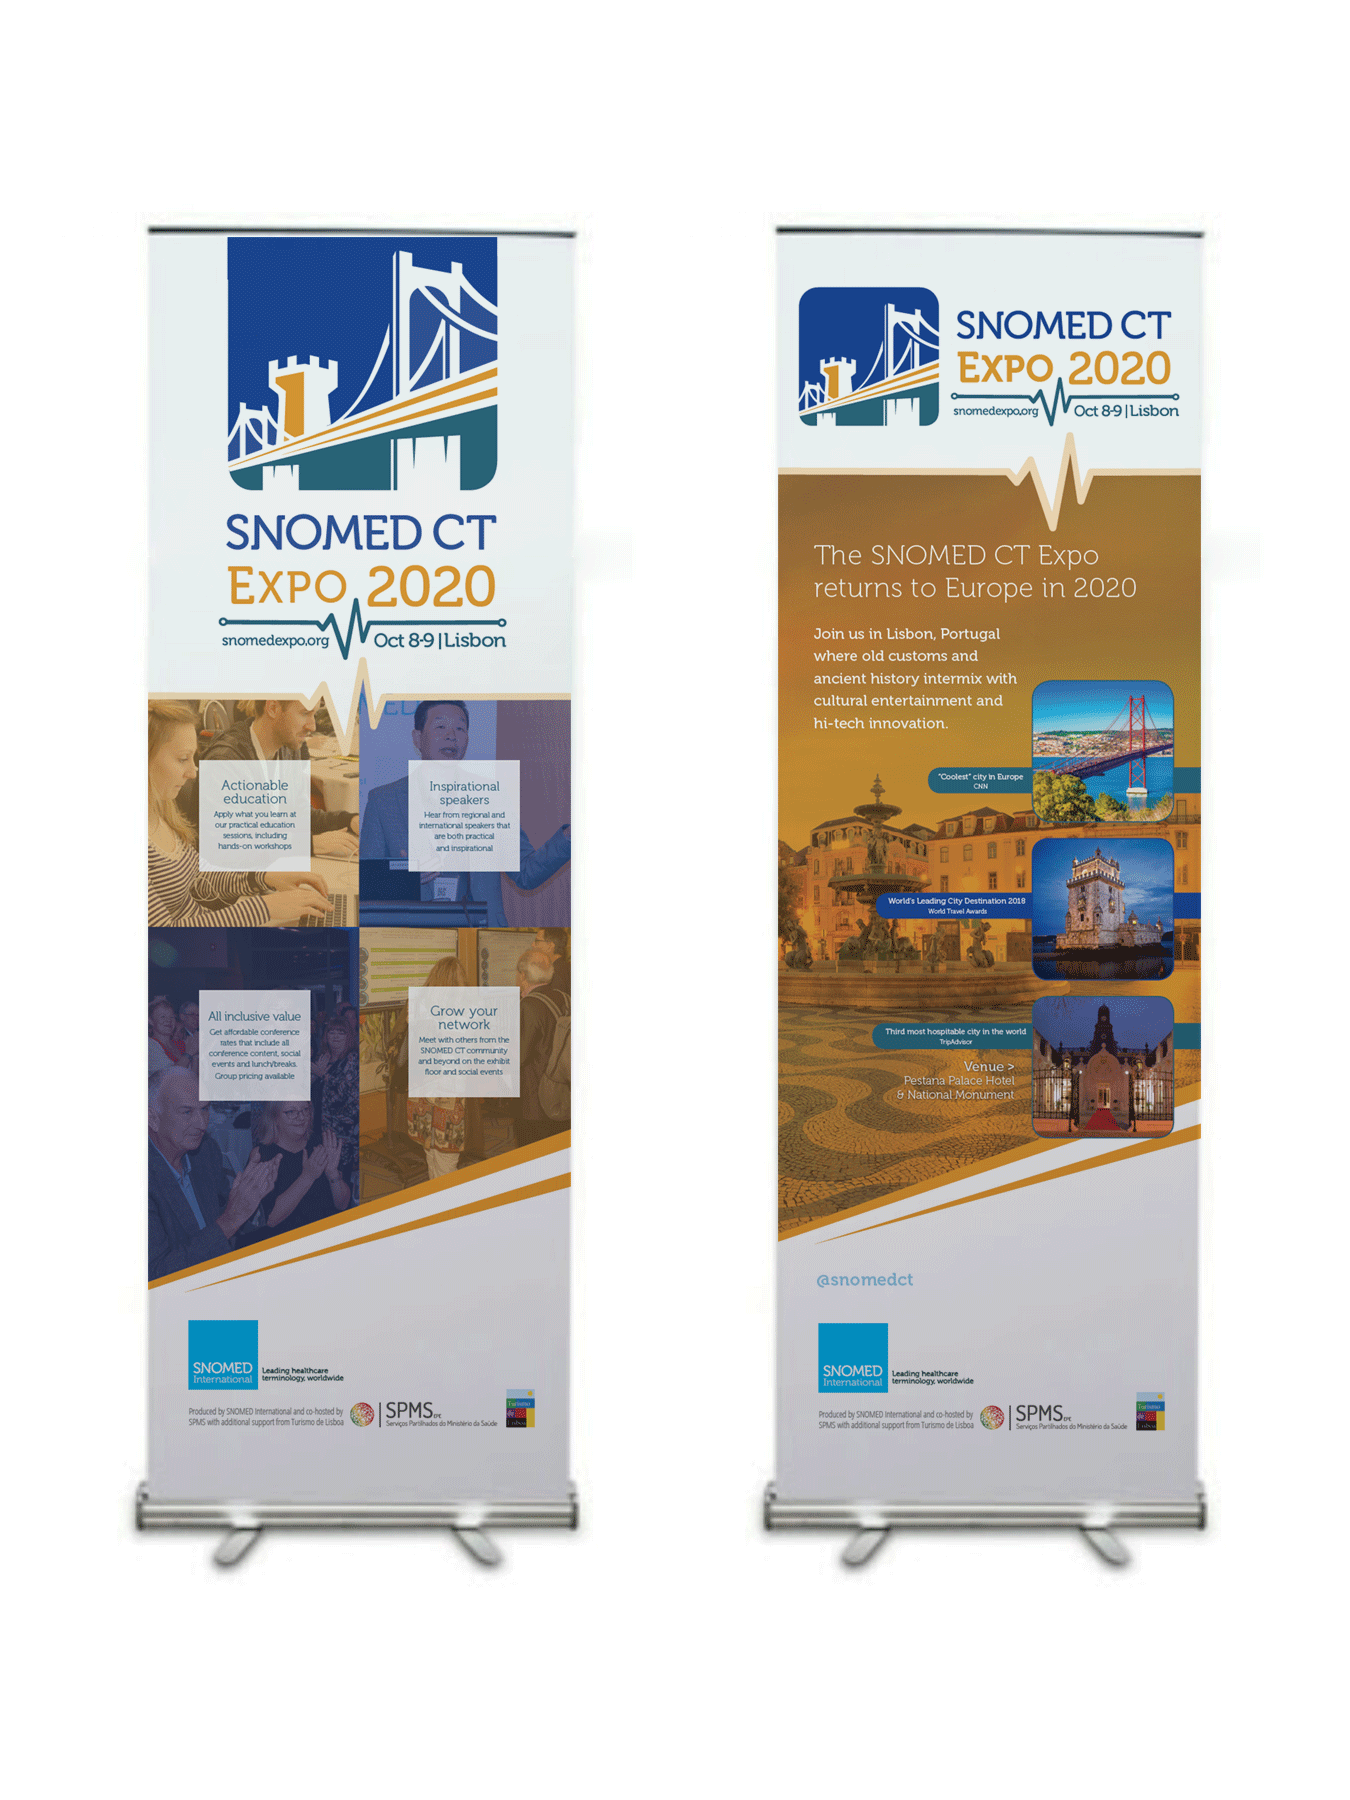 SNOMED CT Expo 2020 pop-up banners